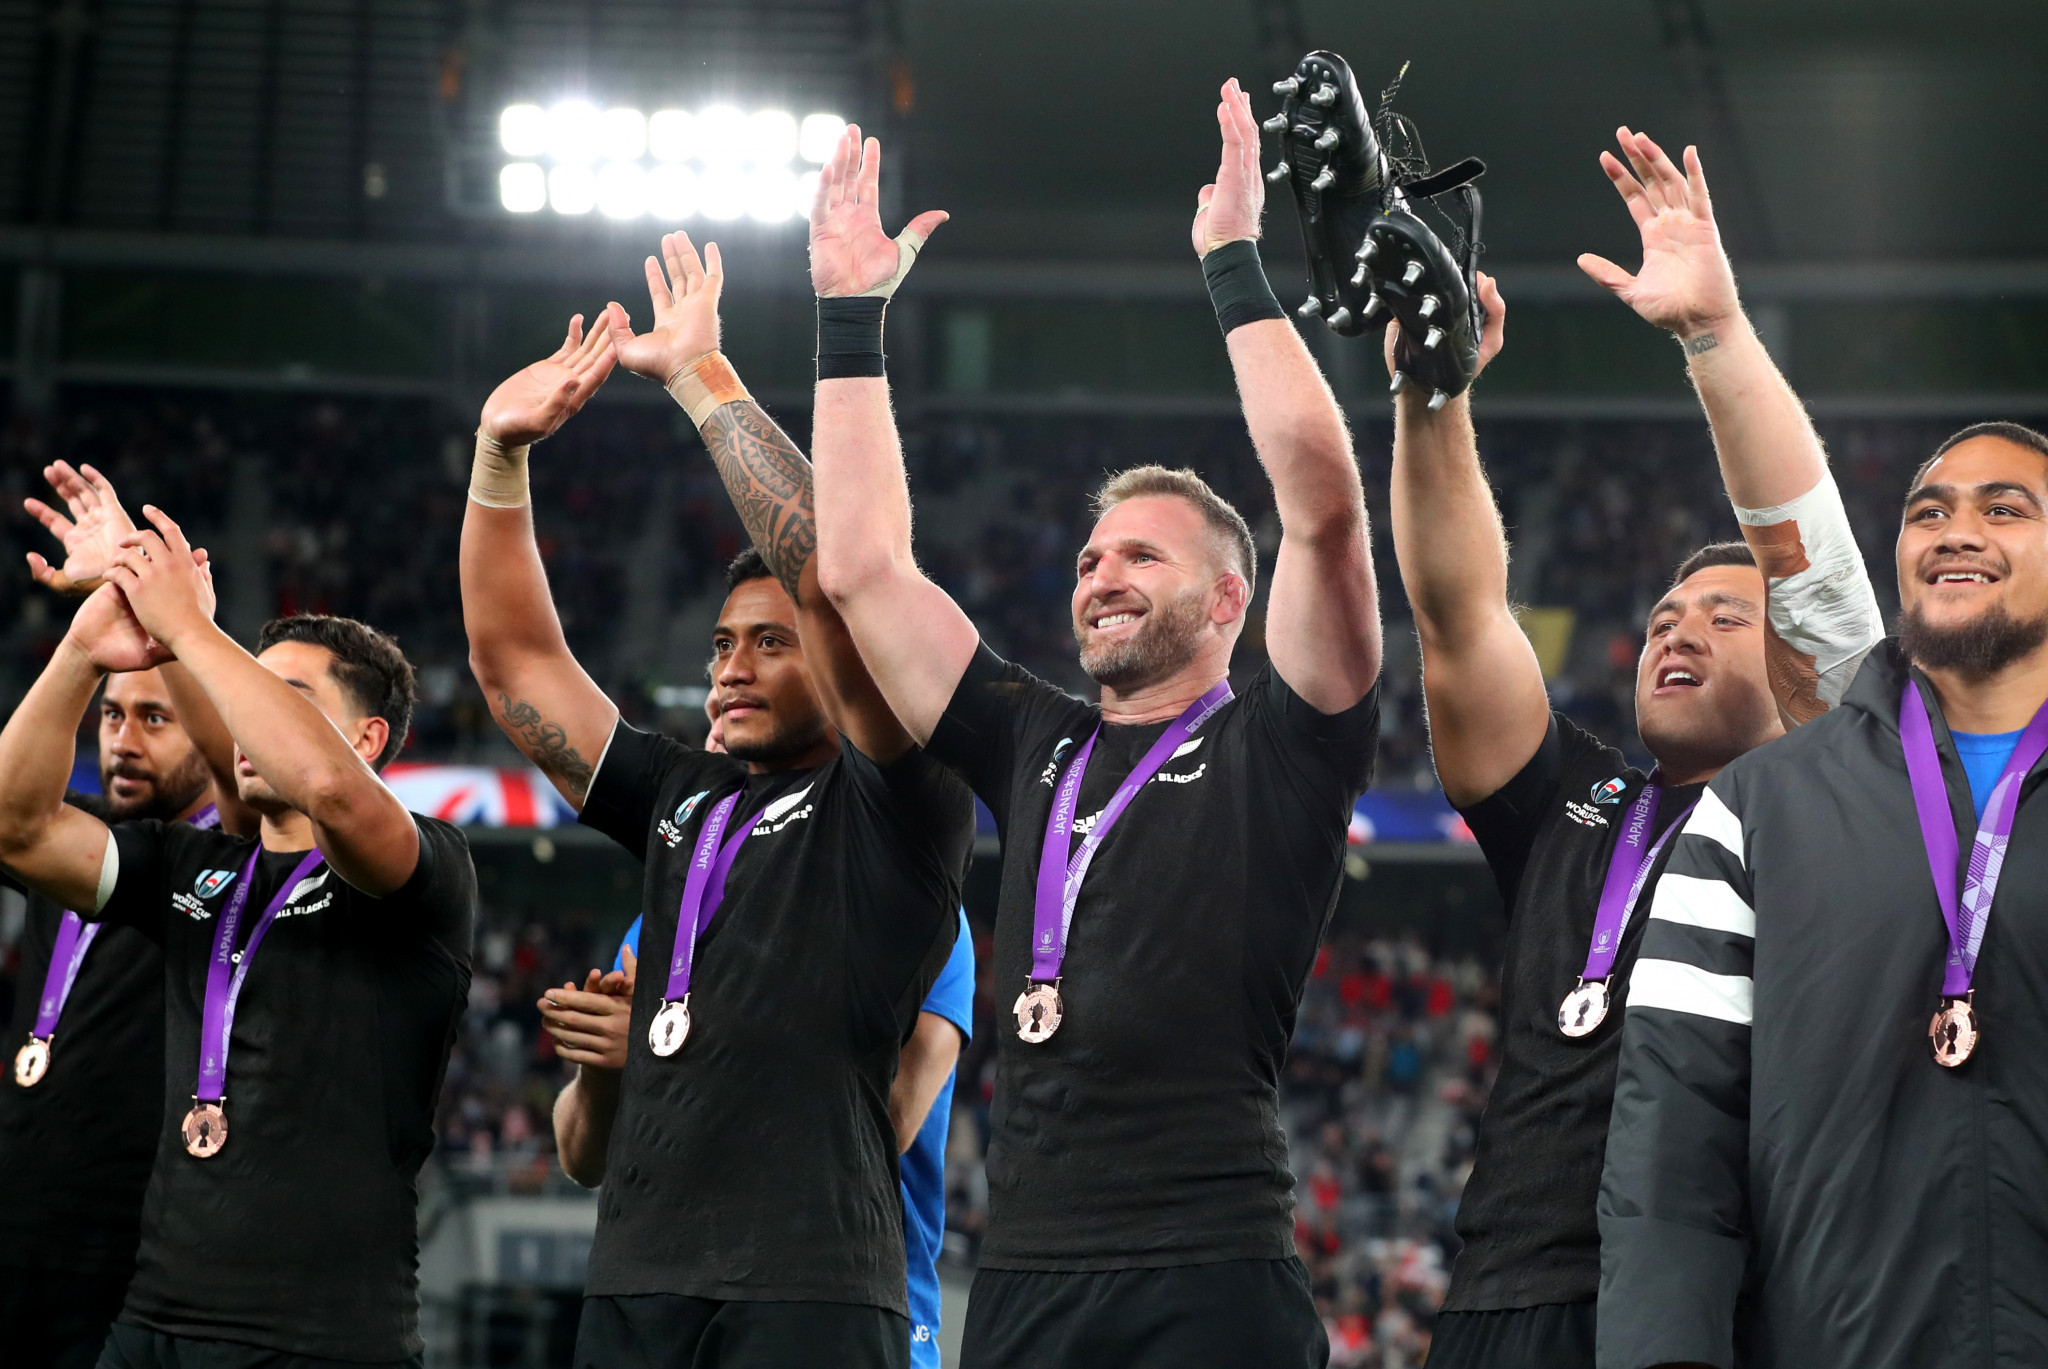 New Zealand took the bronze medal at the 2019 Rugby World Cup ©Getty Images